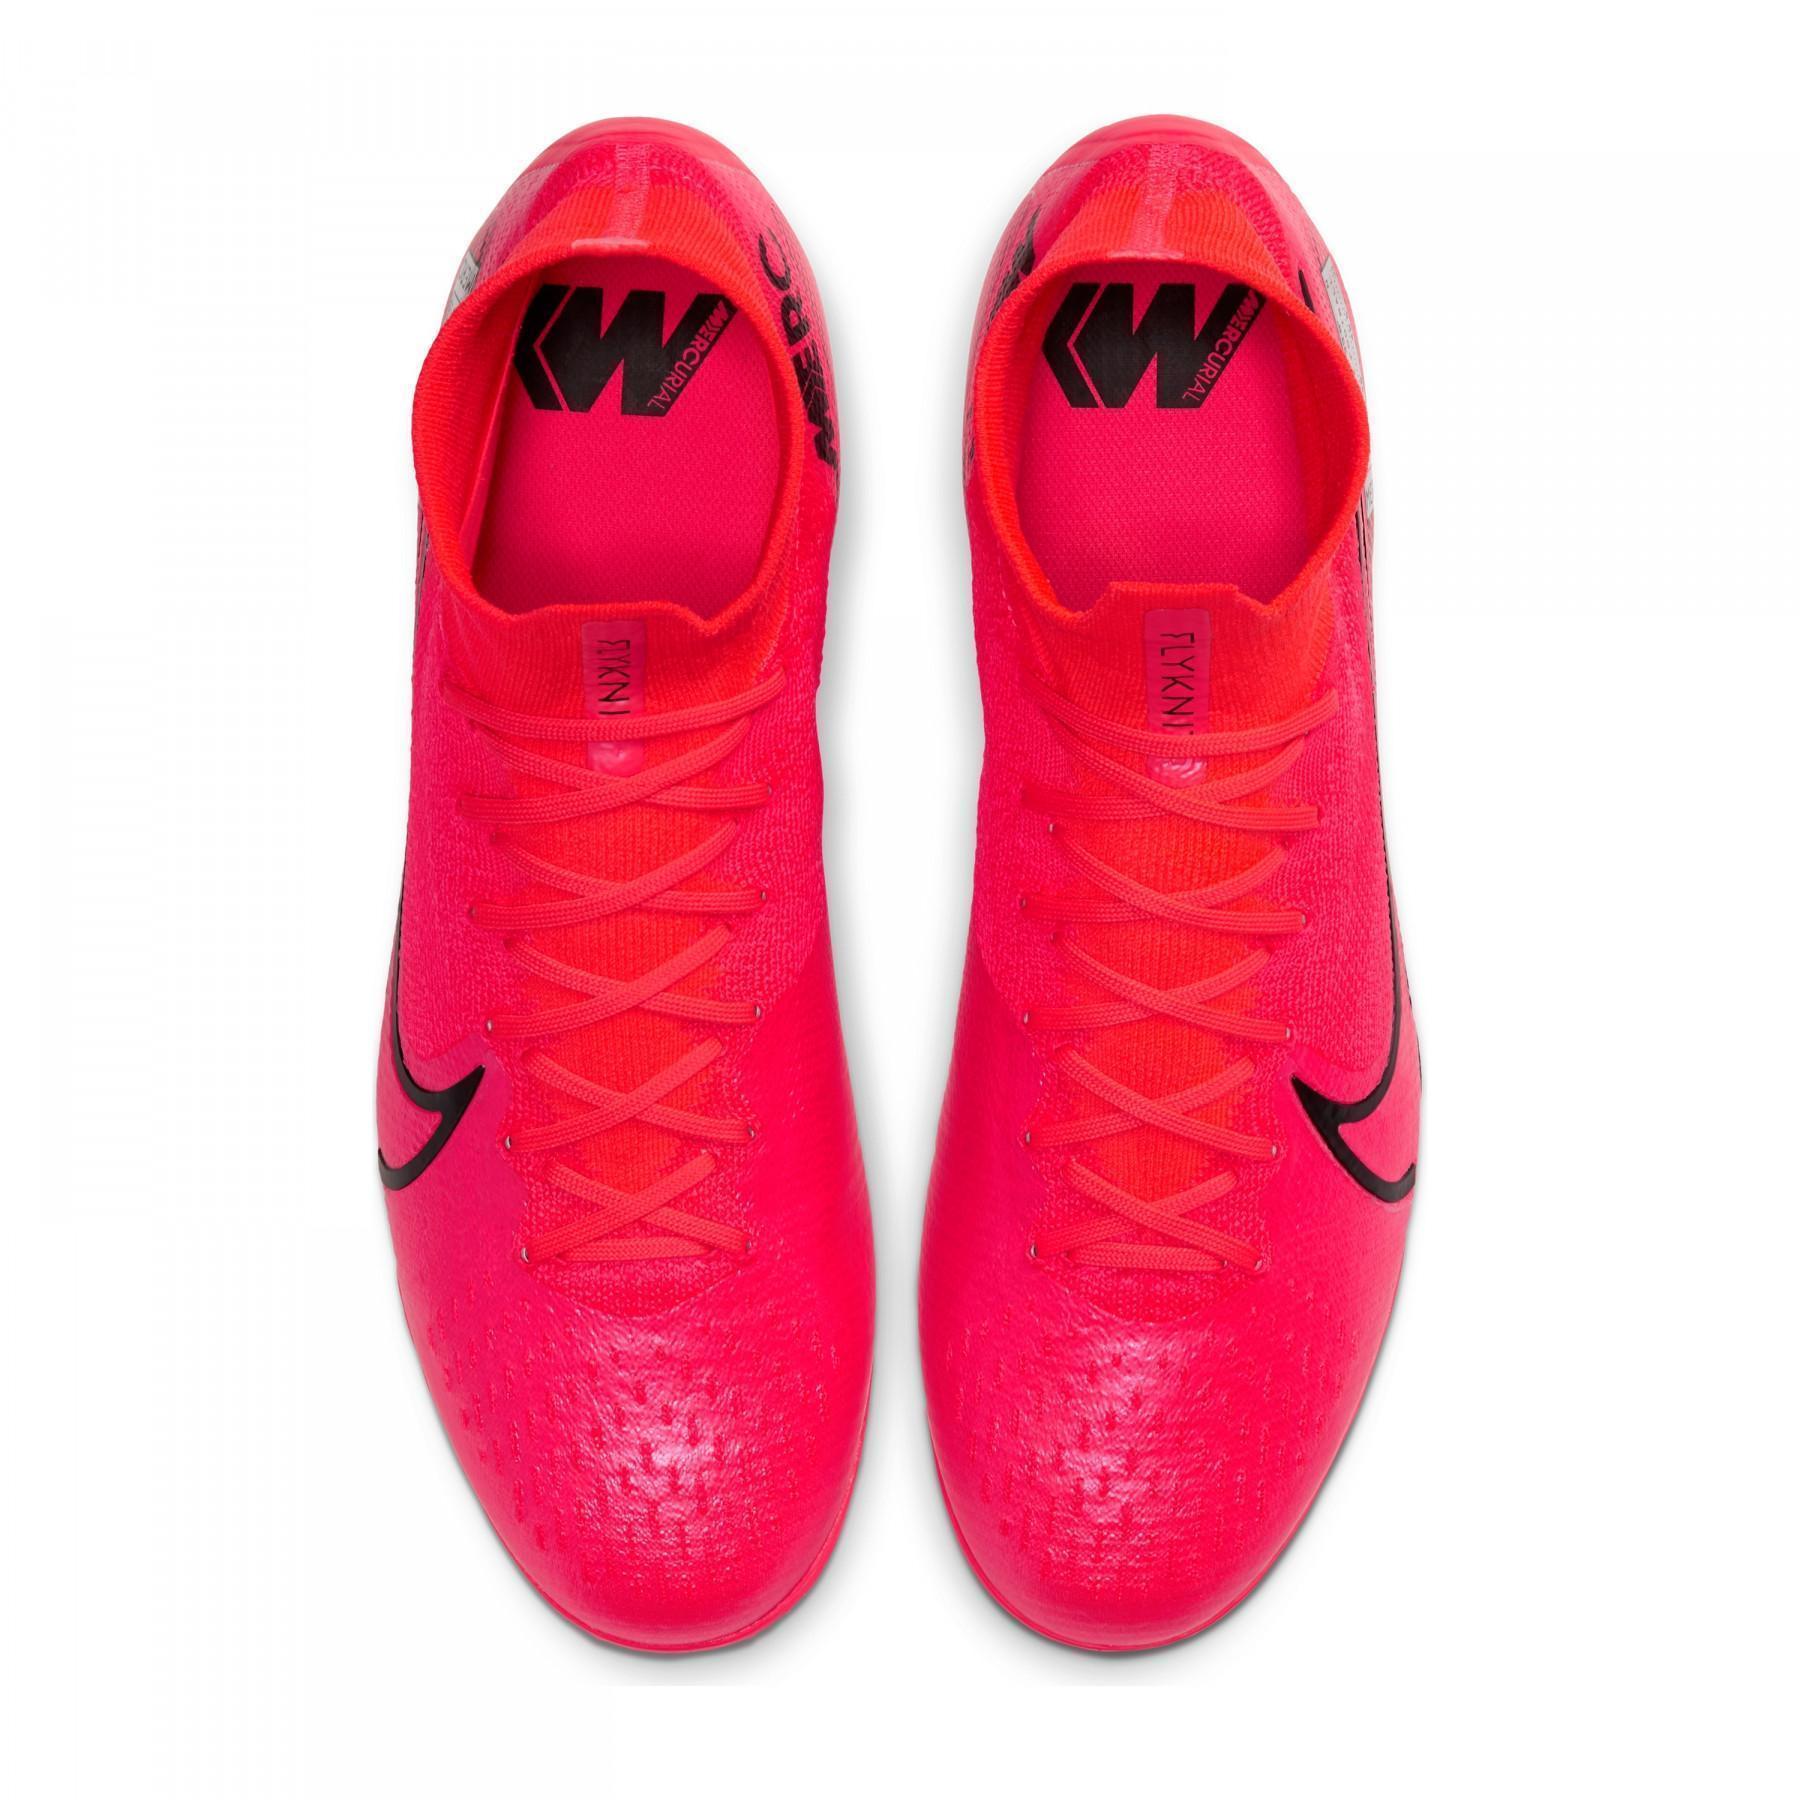 Shoes Nike Mercurial Superfly 7 Elite TF